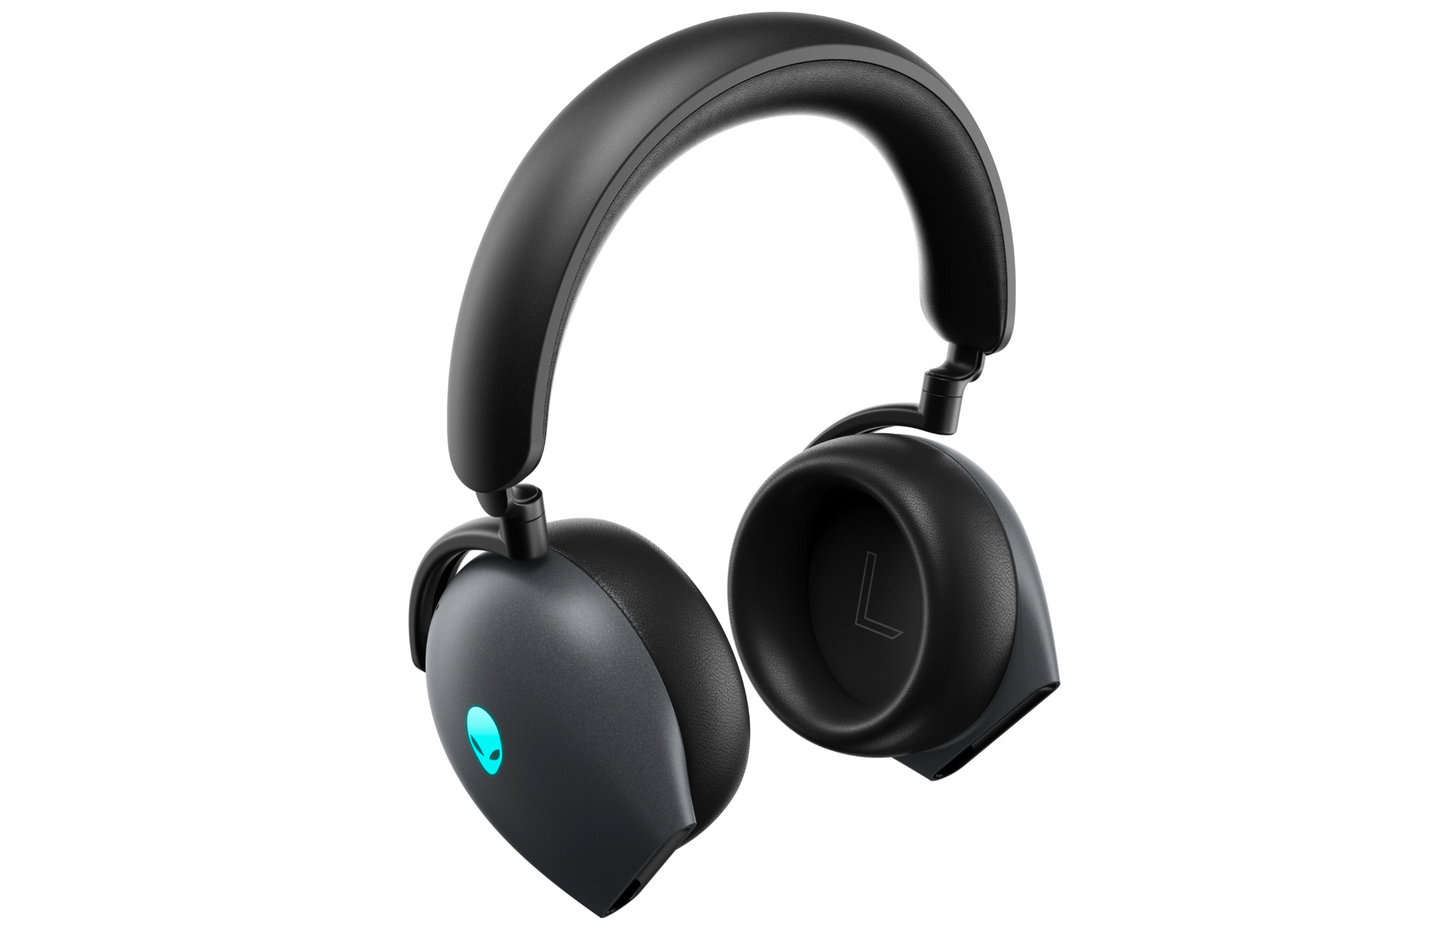 ALIENWARE TRI-MODE WIRELESS GAMING HEADSET AW920H